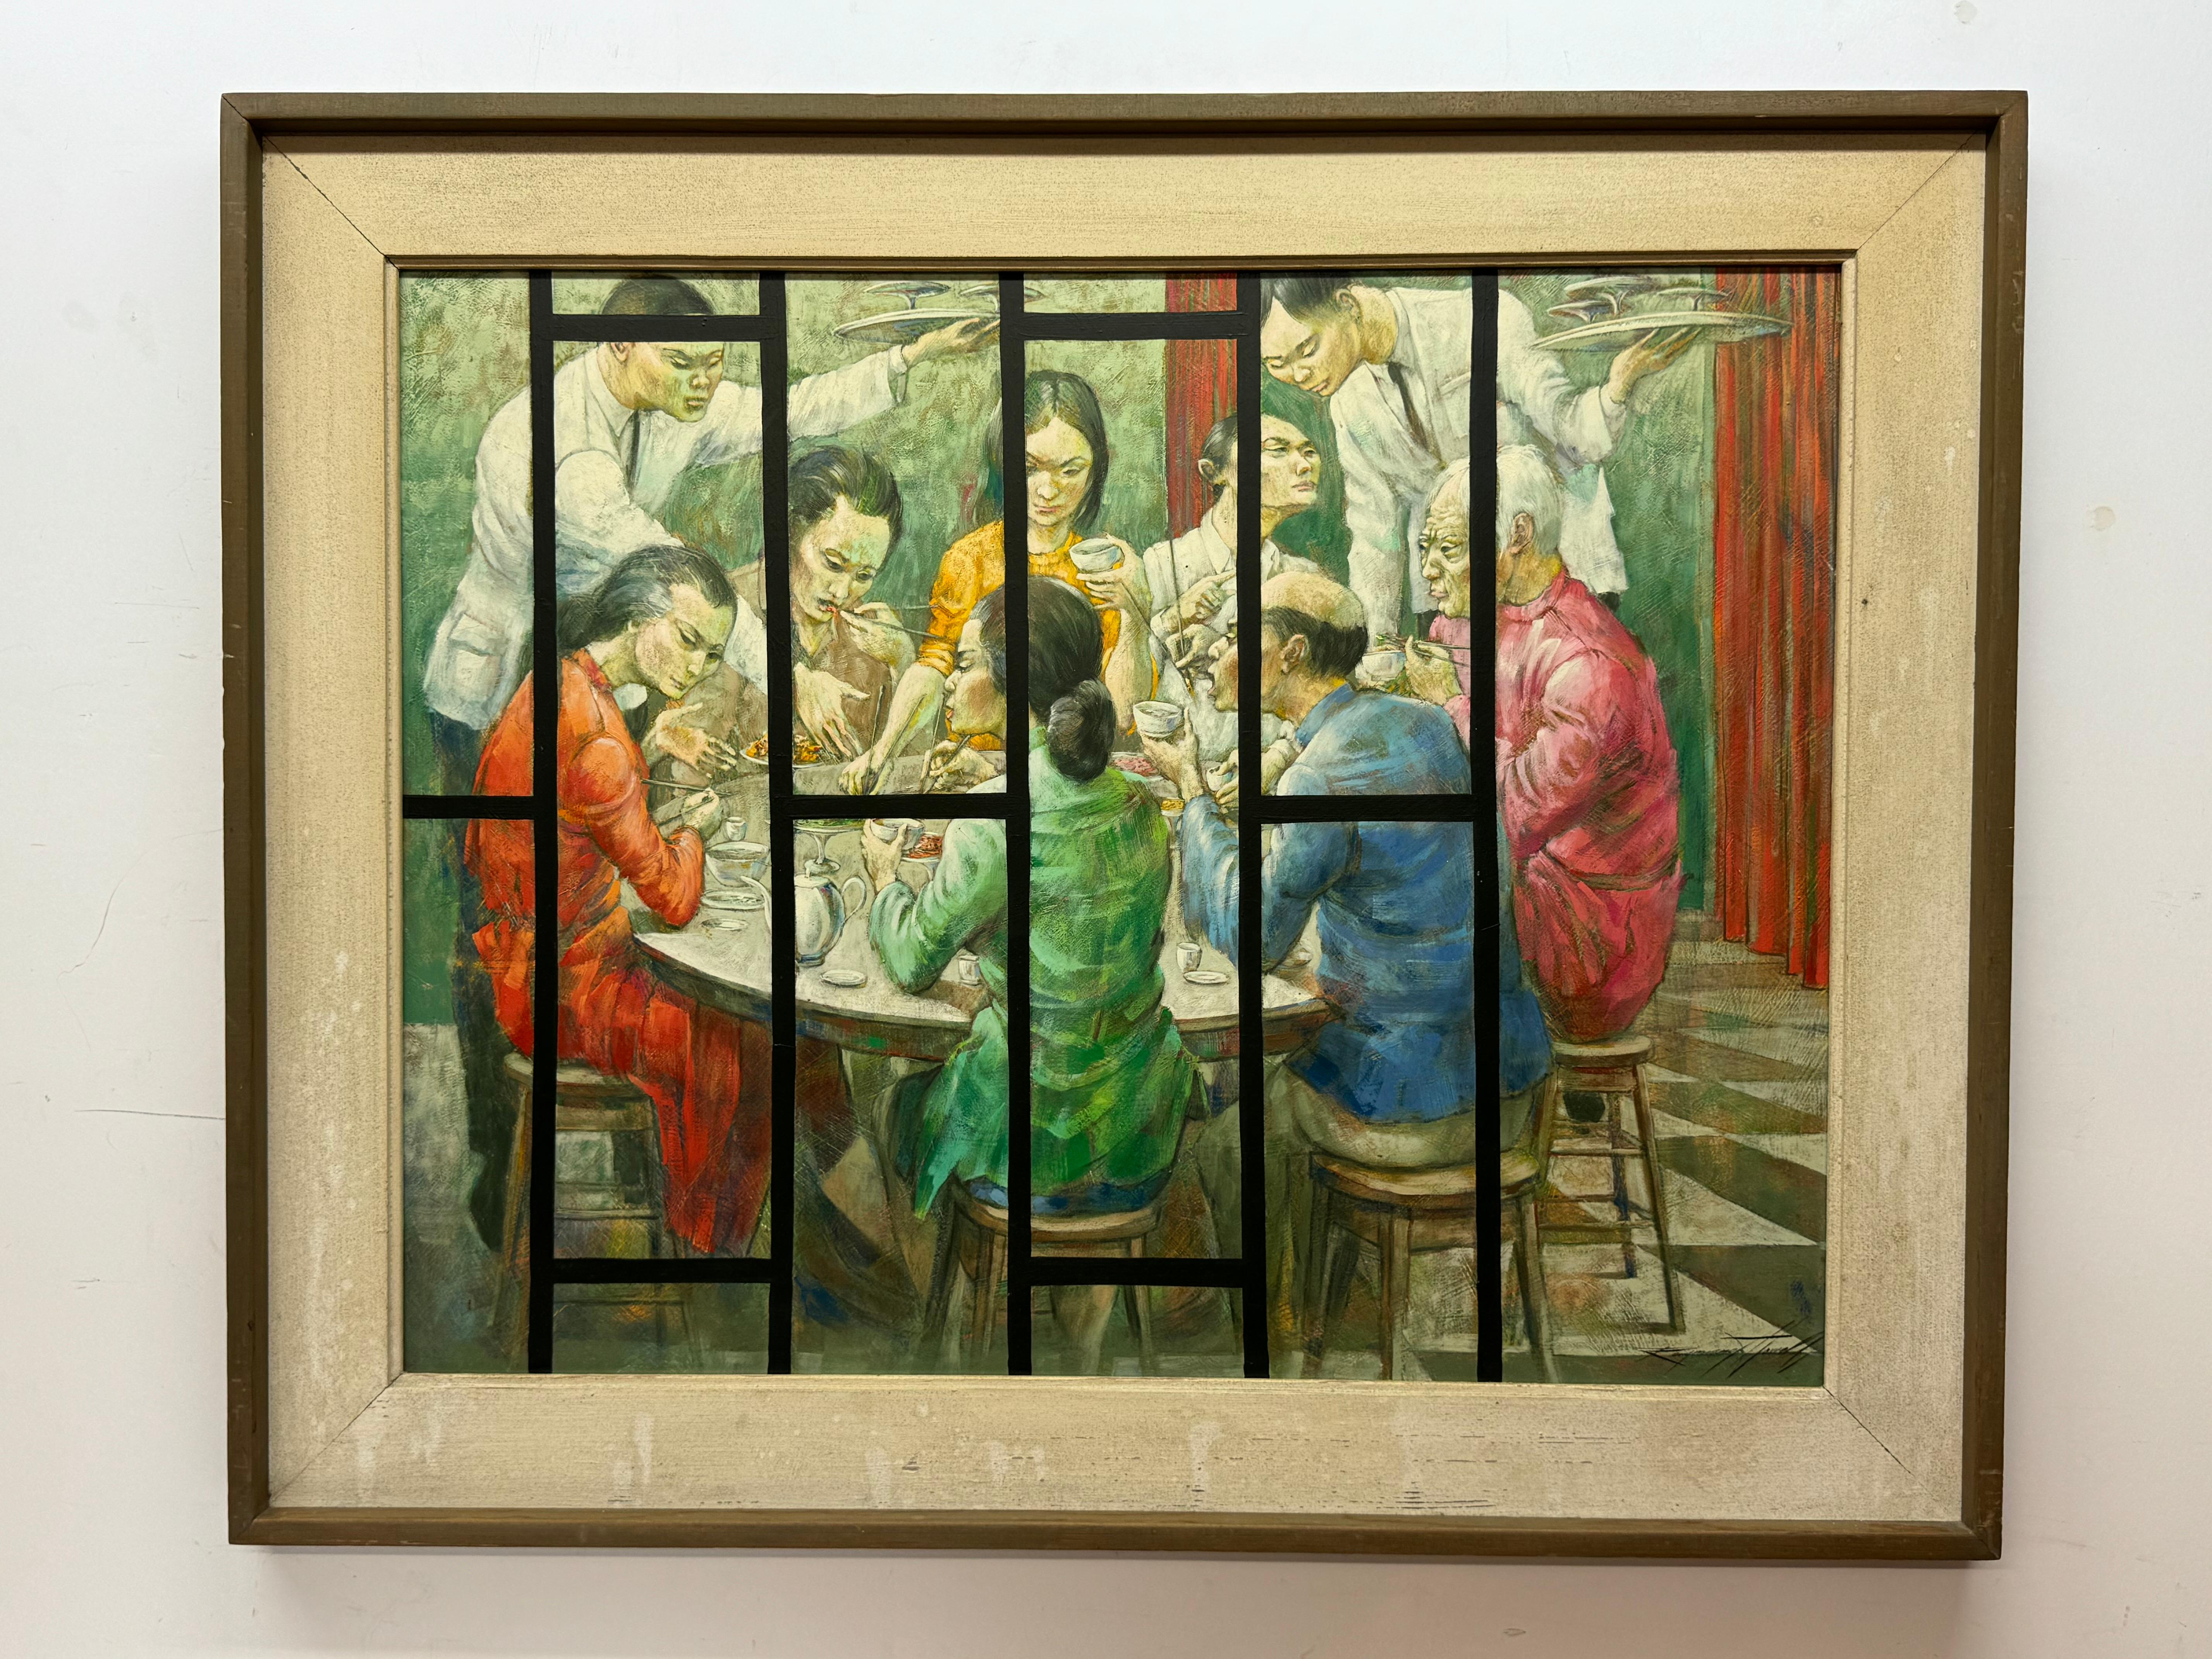 Raymond Howell, Chinese Dim Sum Feast, 1979

Oil on masonite

28" x 36" unframed, 35.5" x 43. 75" framed

Biography from Raymond Howell website:

Raymond Howell’s paintings are based in realism, with influences of surrealism, impressionism, and